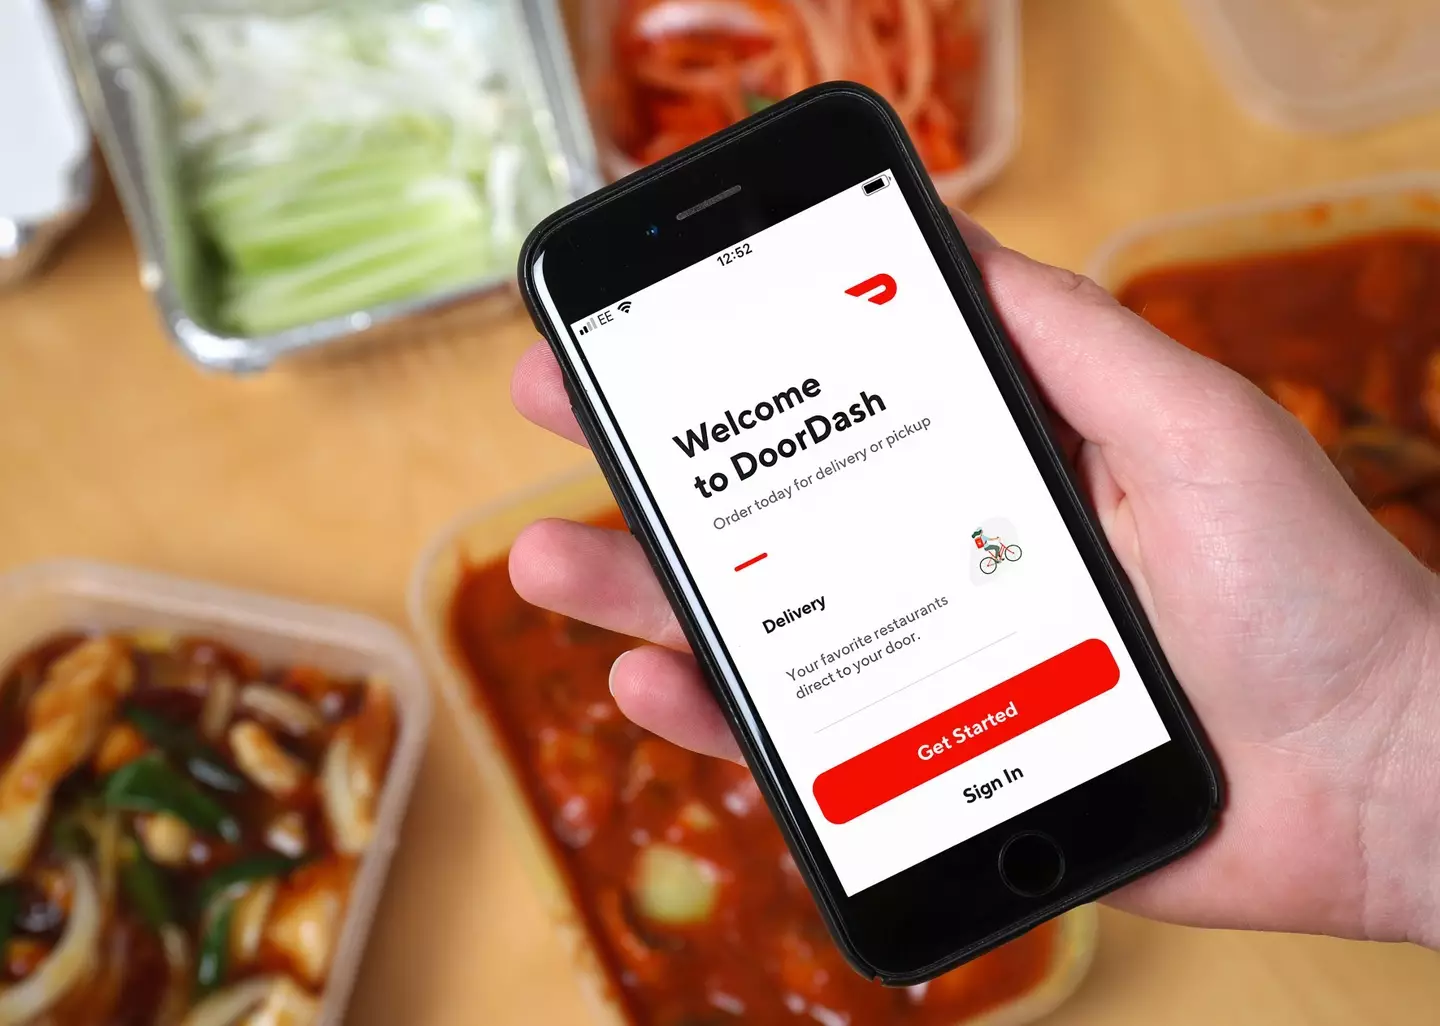 Naturally, DoorDash drivers want to be well-tipped.